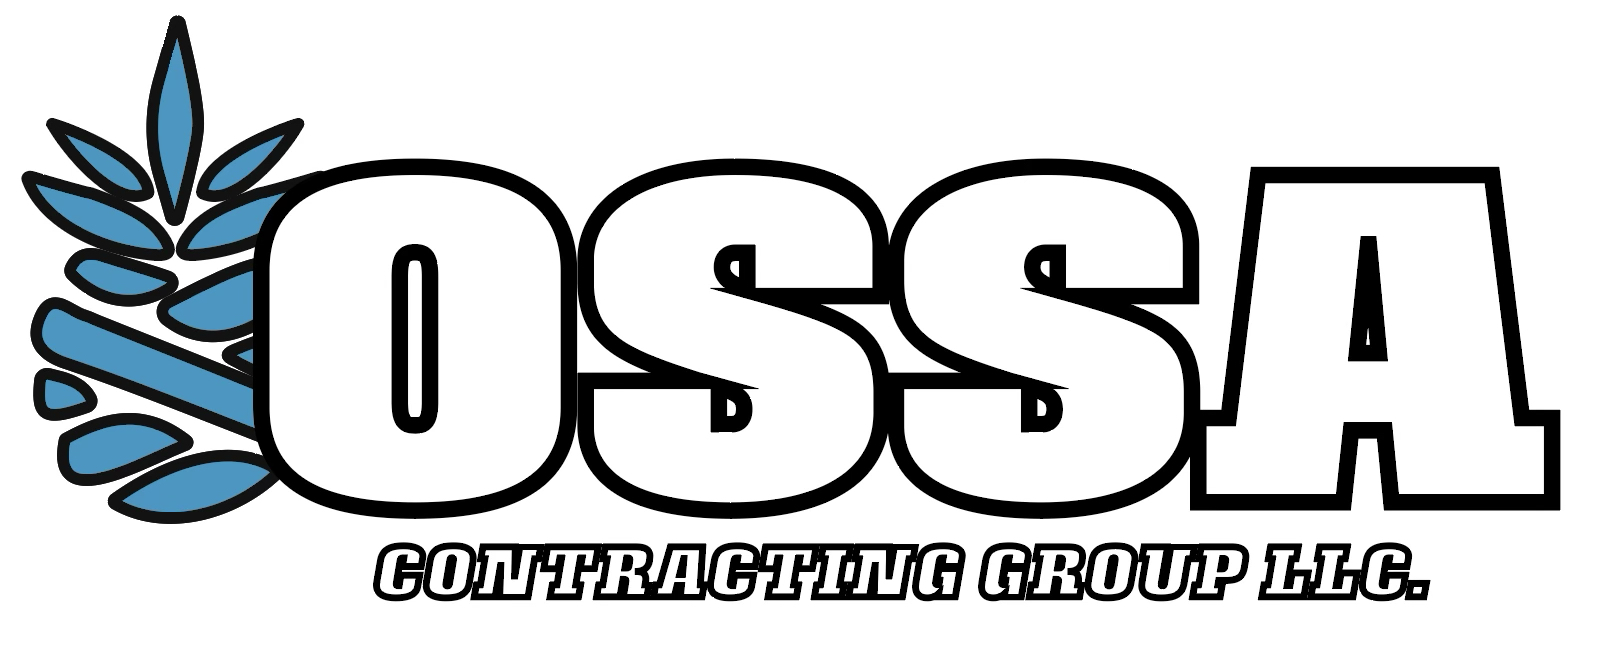 Ossa Contracting Group Logo